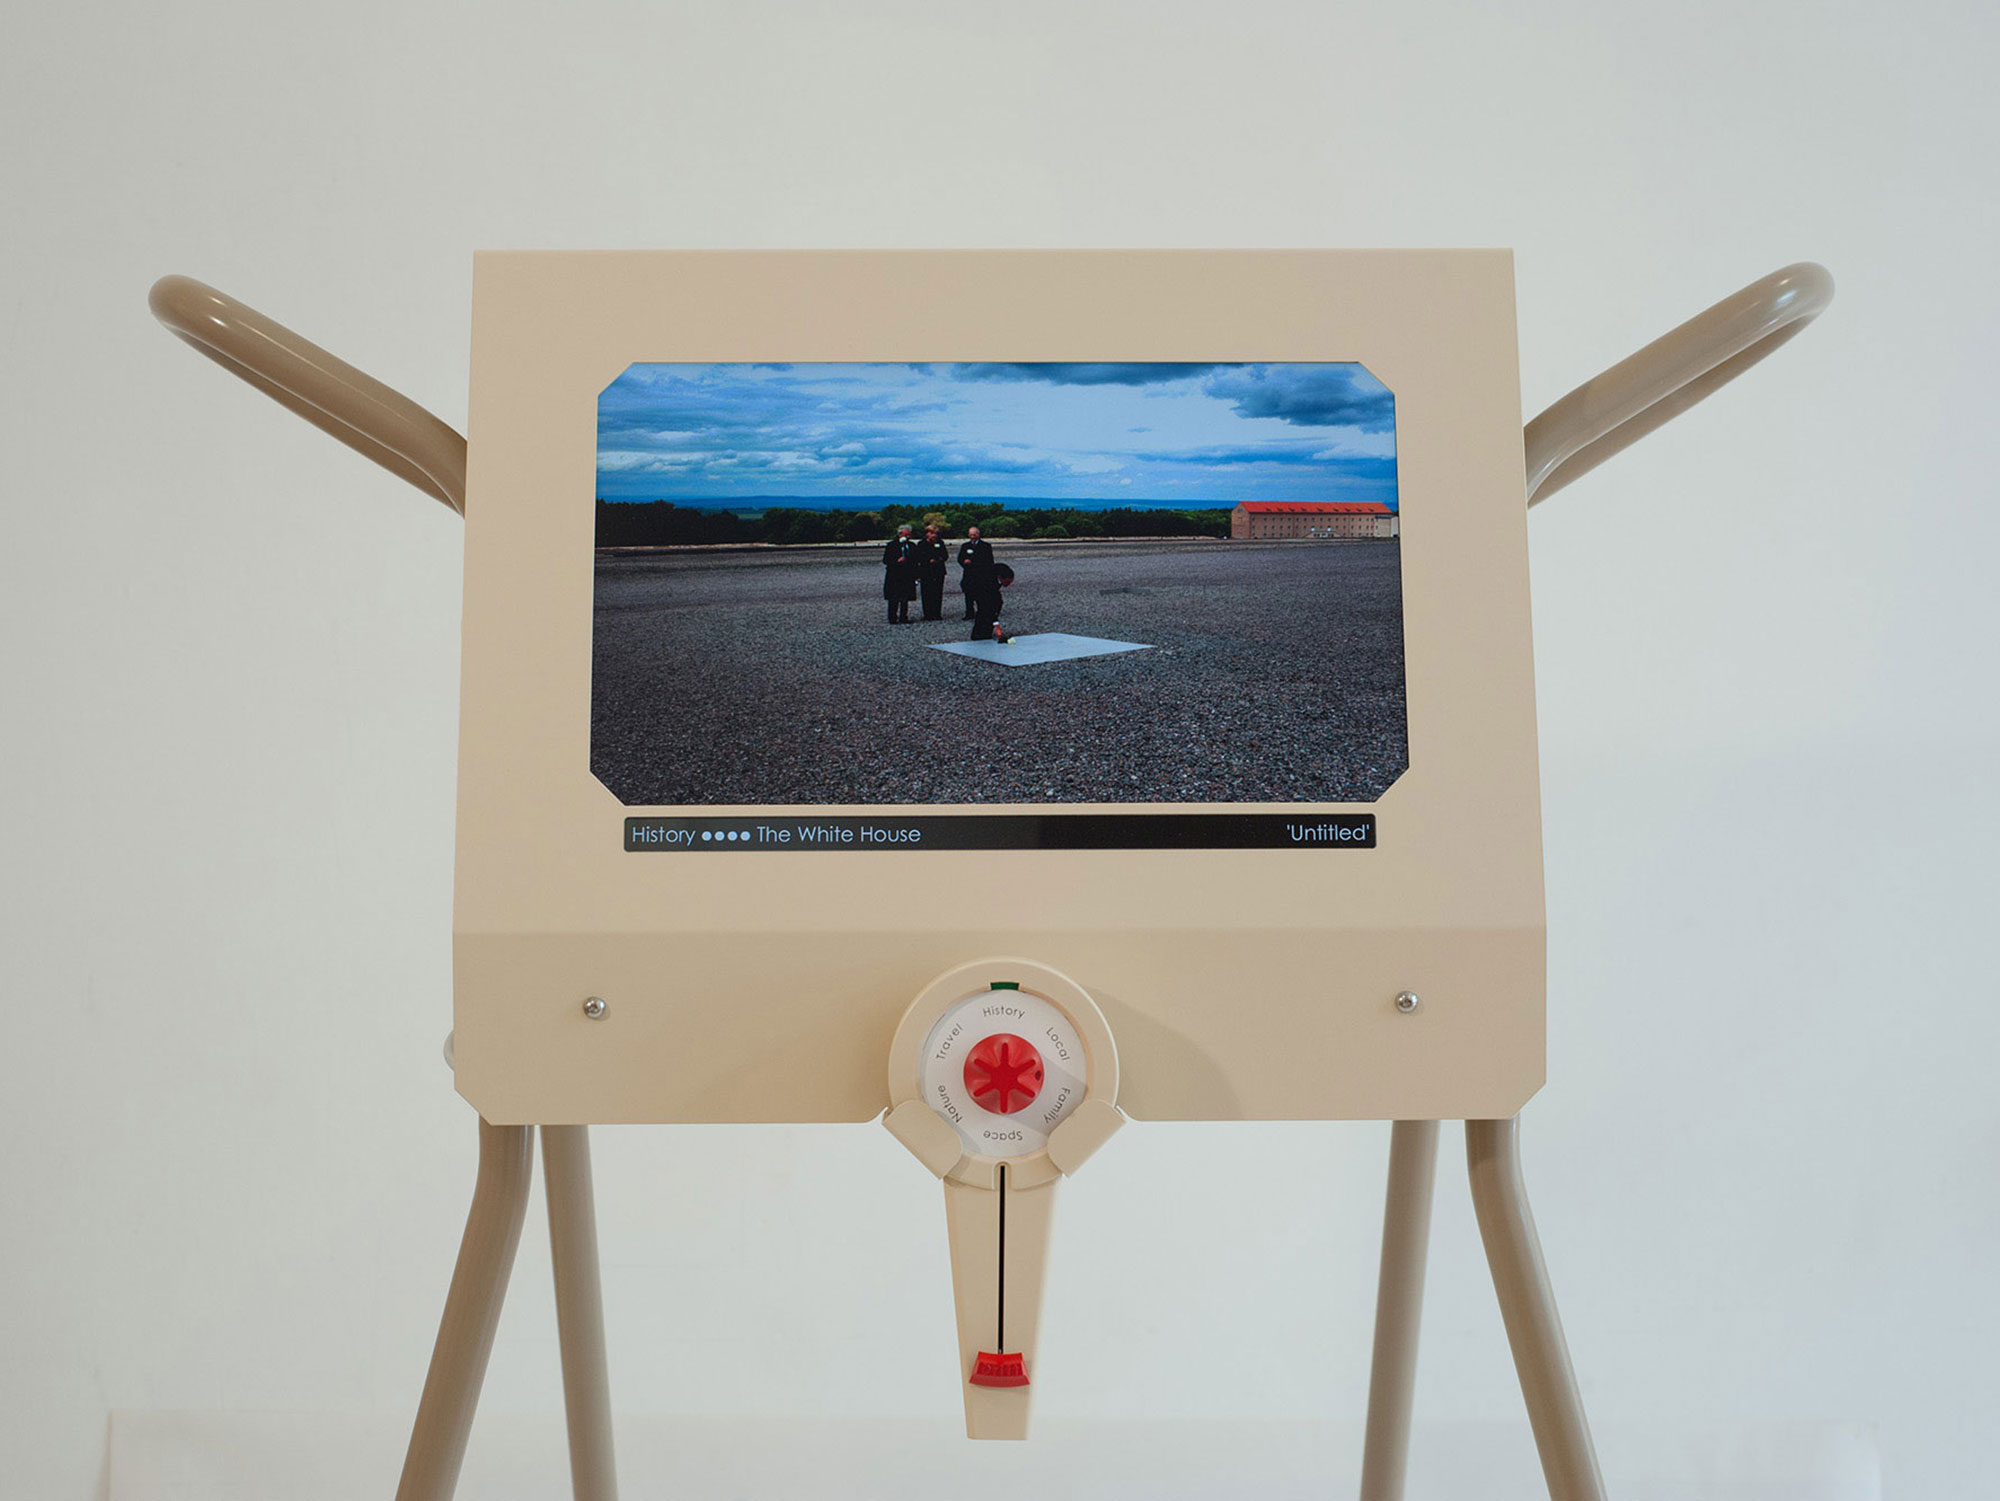 A photograph of the Photostroller featuring an image on the screen of Barack Obama attending a ceremony